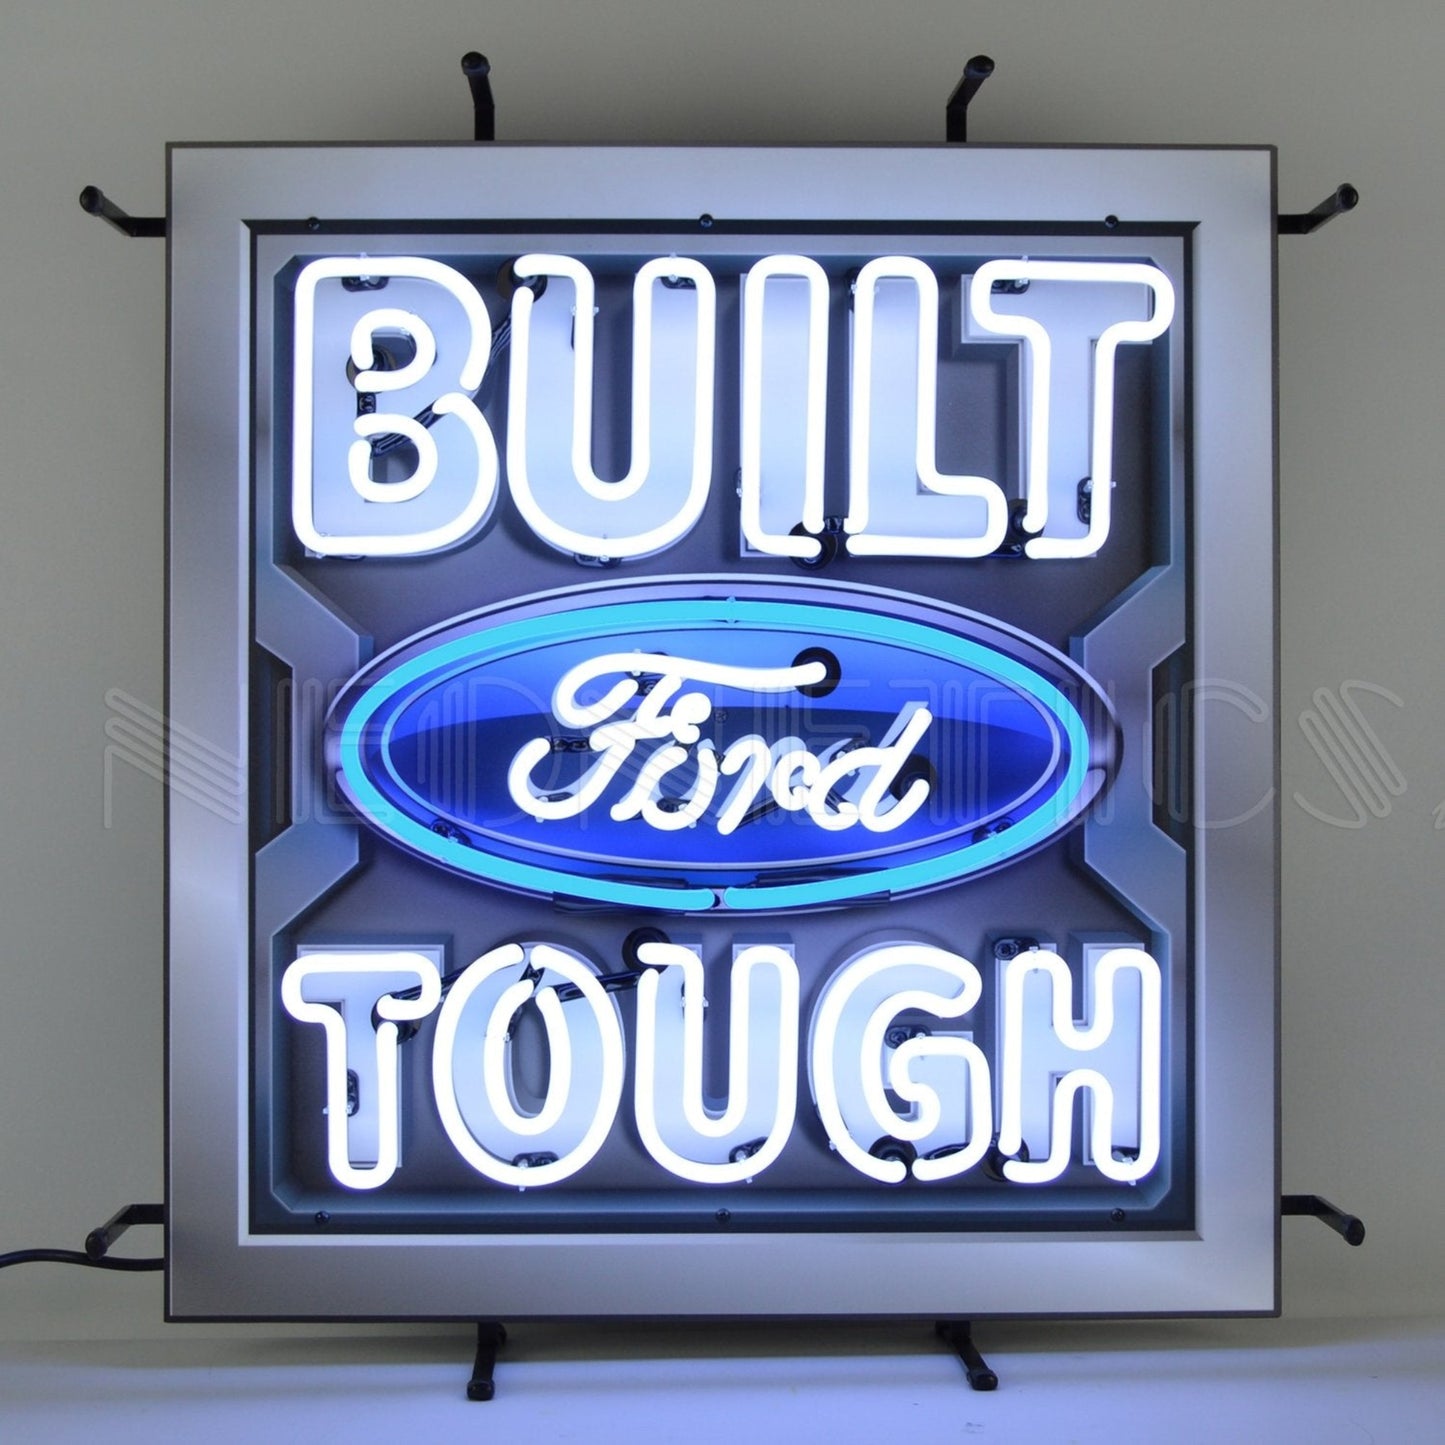 "Built Ford Tough" neon sign with prominent Ford logo in white and blue.